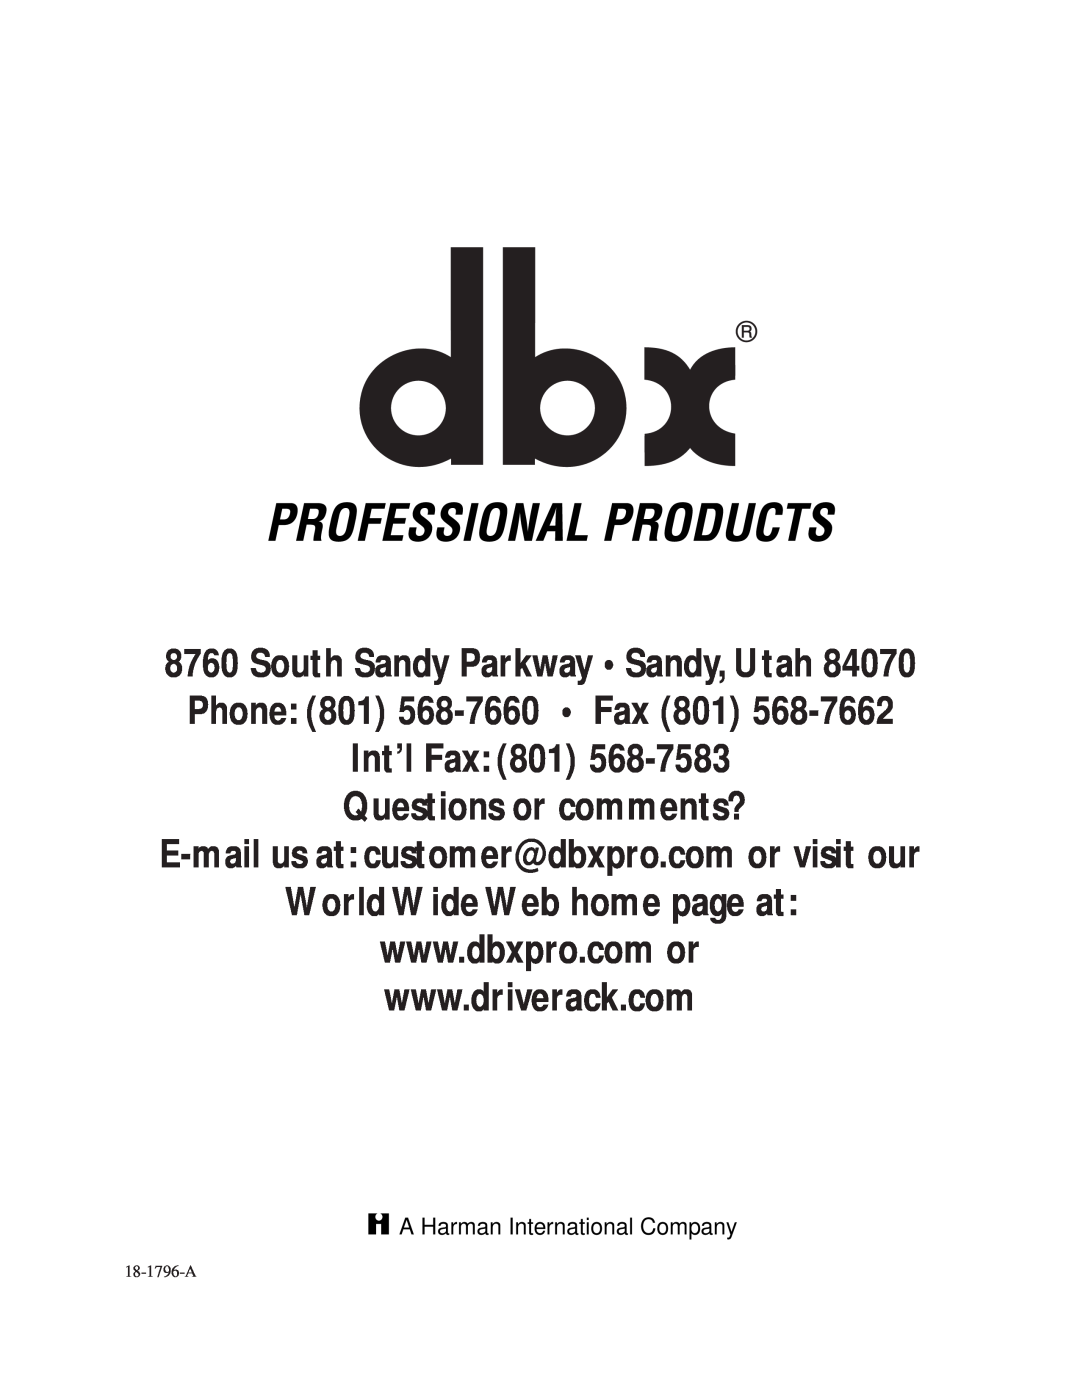 dbx Pro 260 user manual Questions or comments?, World Wide Web home page at, A Harman International Company 